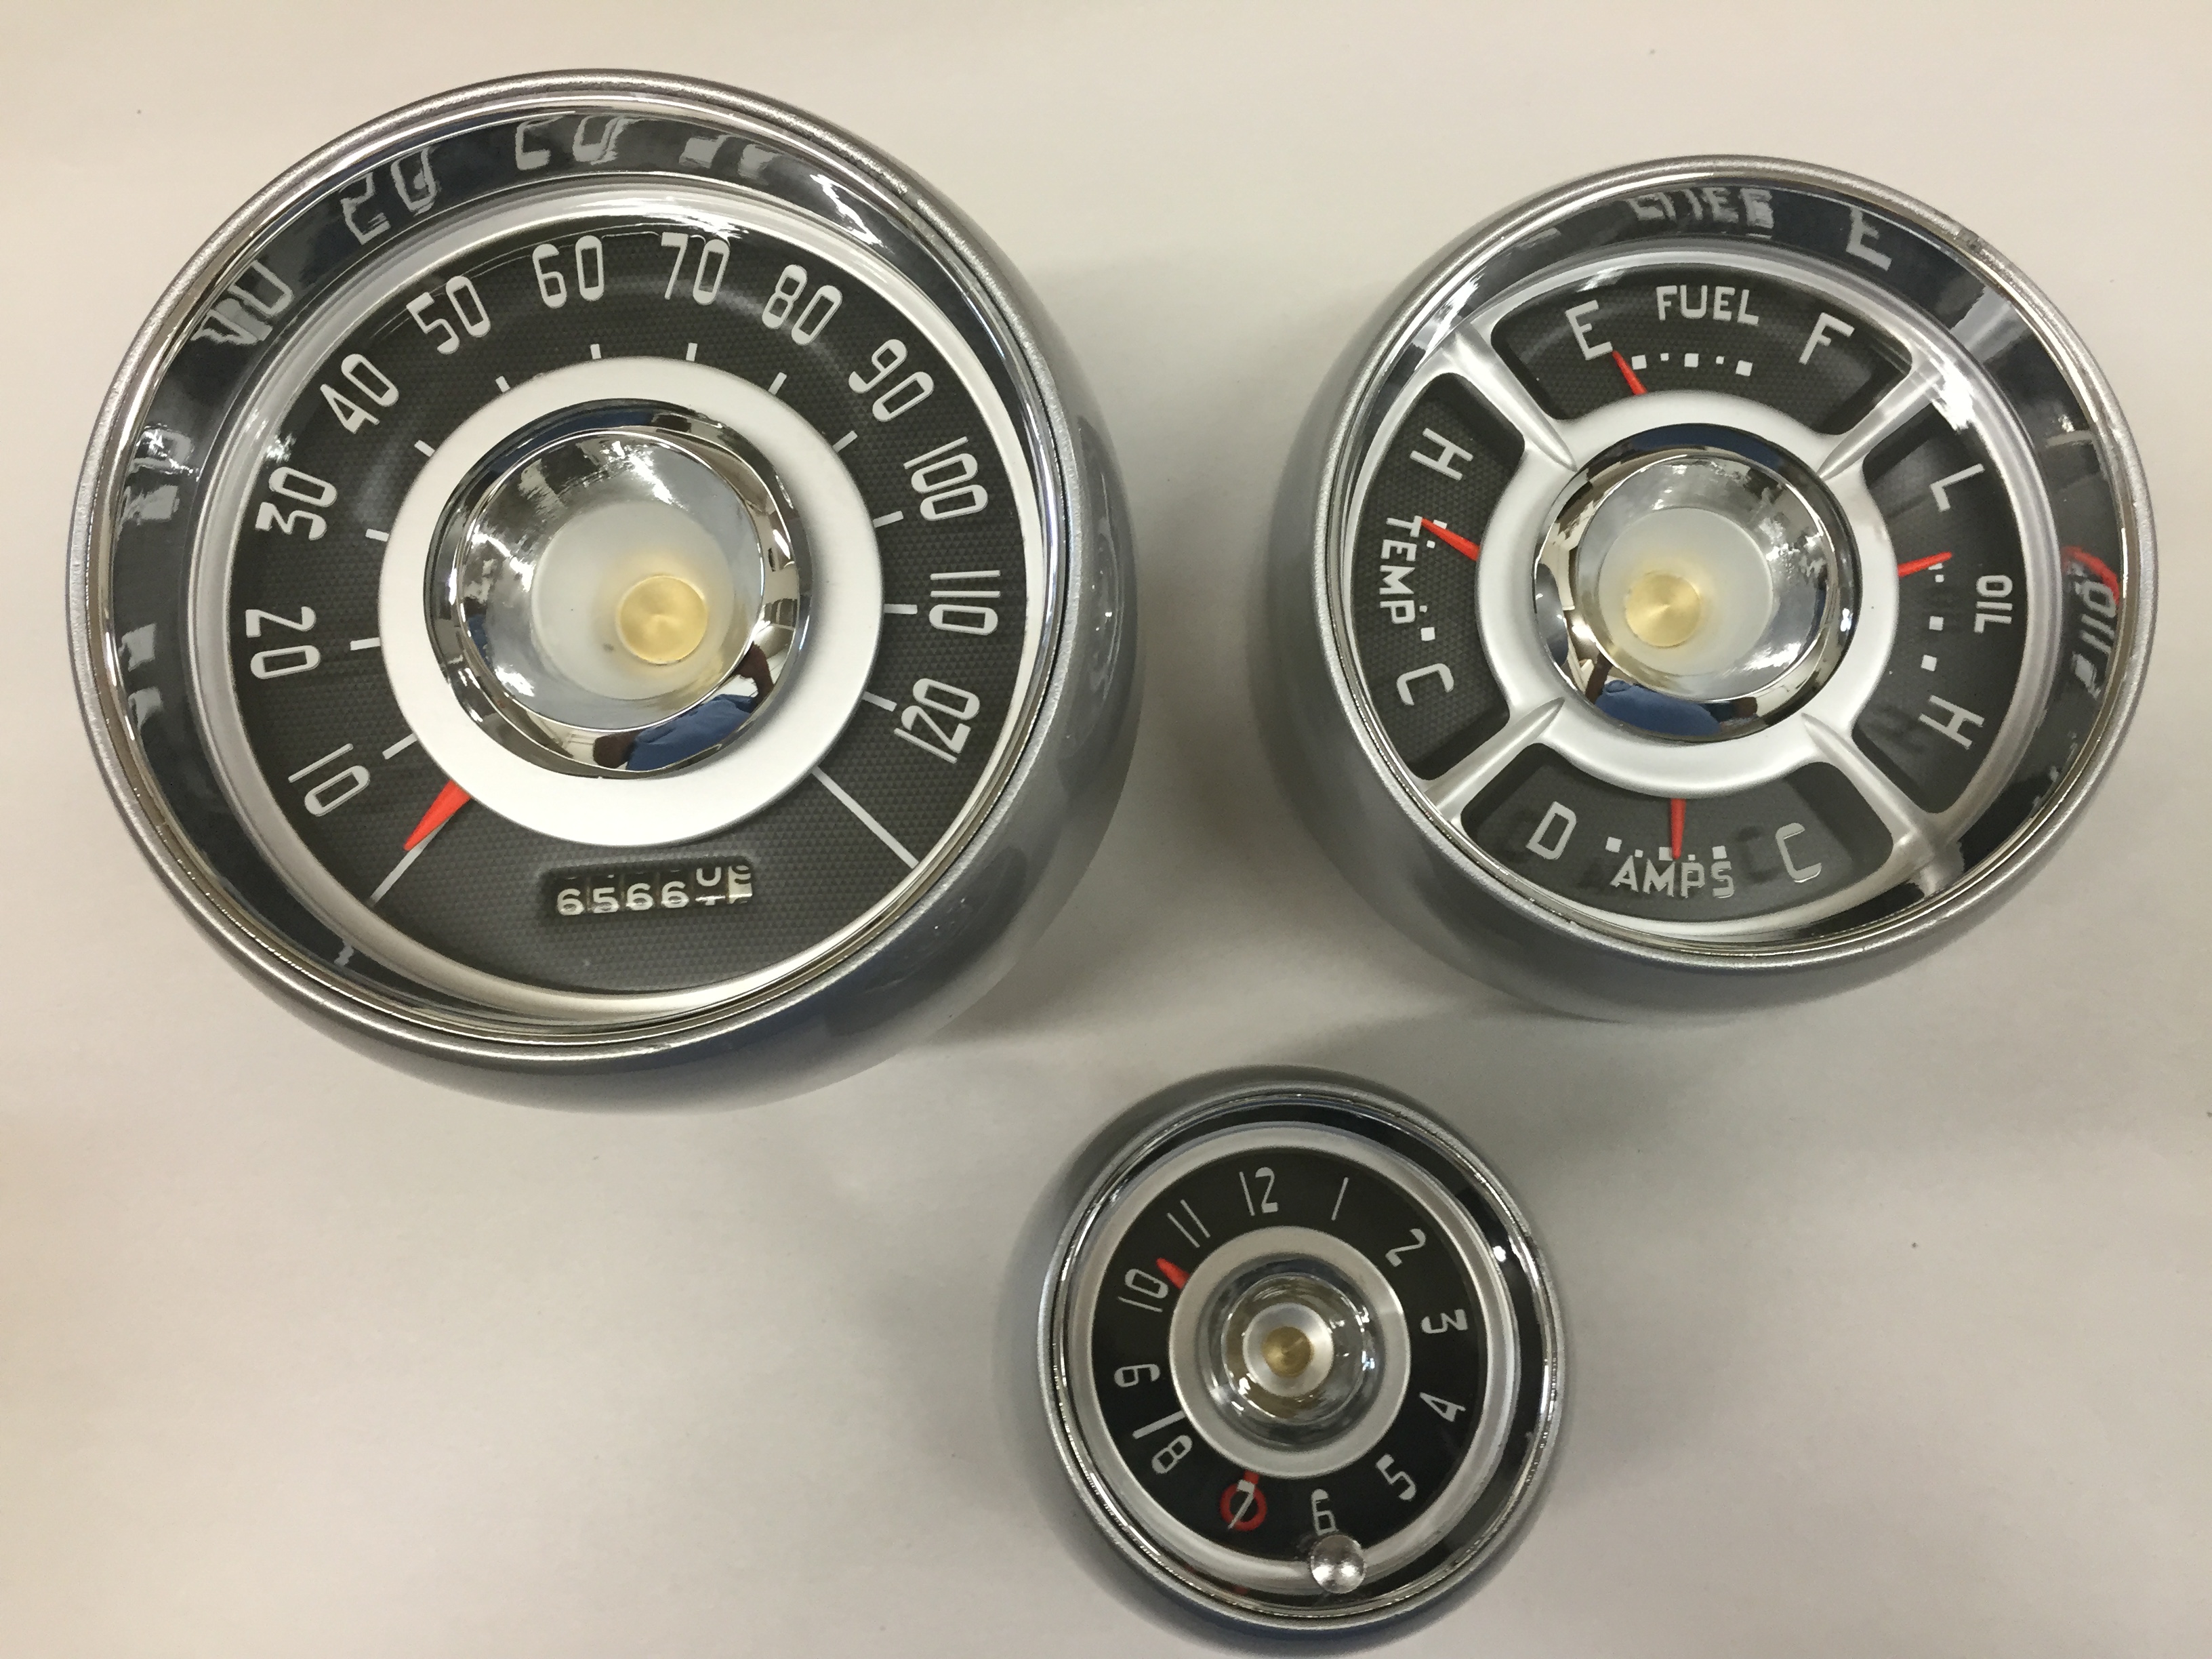 Three speedometers with a circular design